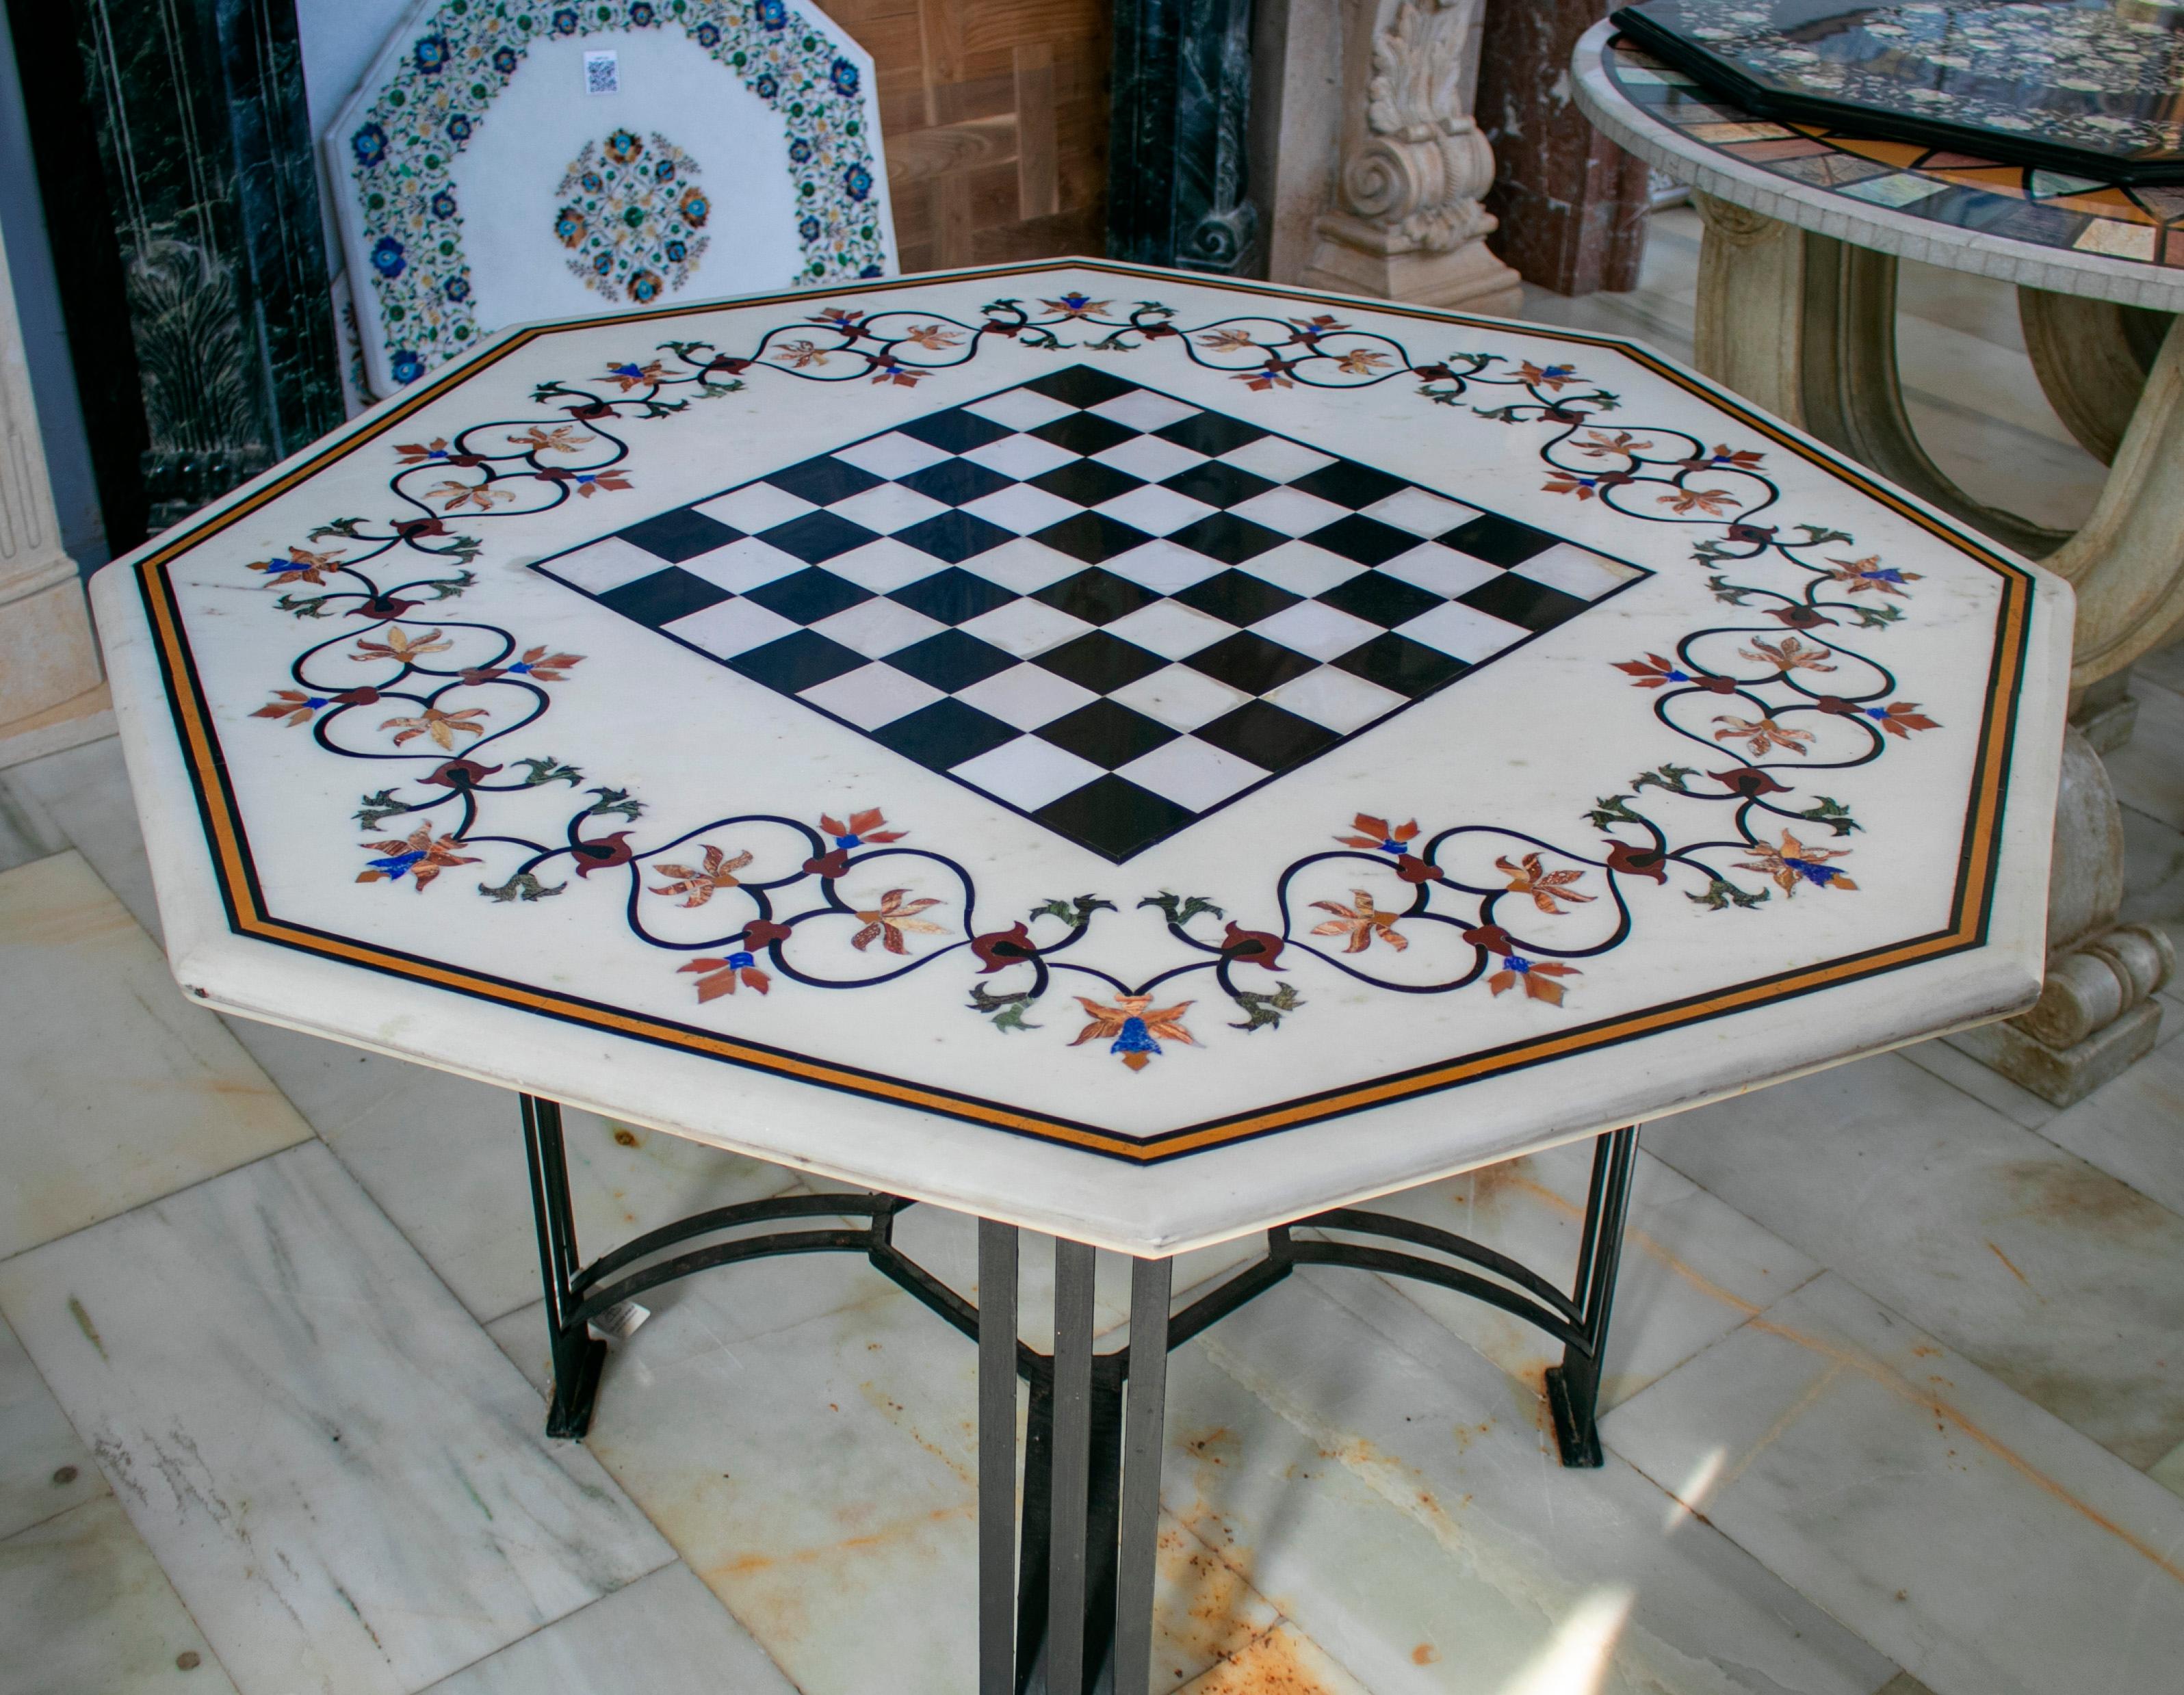 Octagonal Italian pietre dure technique handmade mosaic white marble chess table top with blue lapis, green jade, pink amethyst and other semiprecious stones inlays.
 